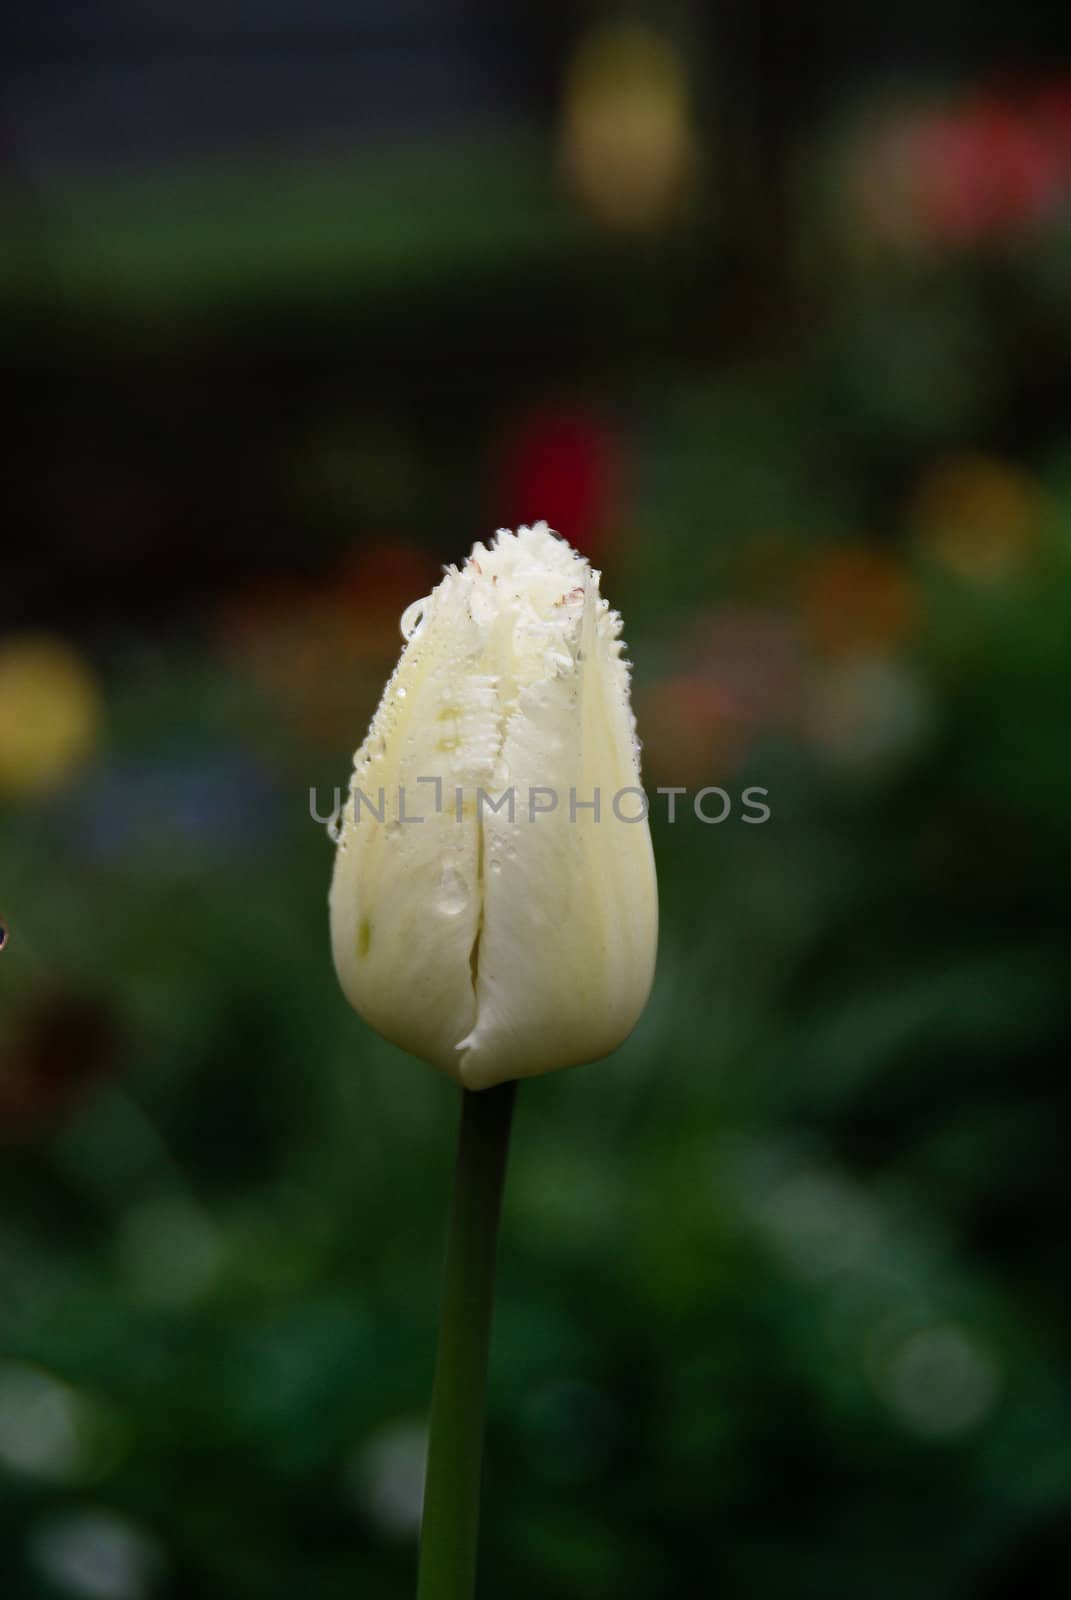 white tulip growing in the garden on the rebate, a picture taken in Poland 04.05.2008 